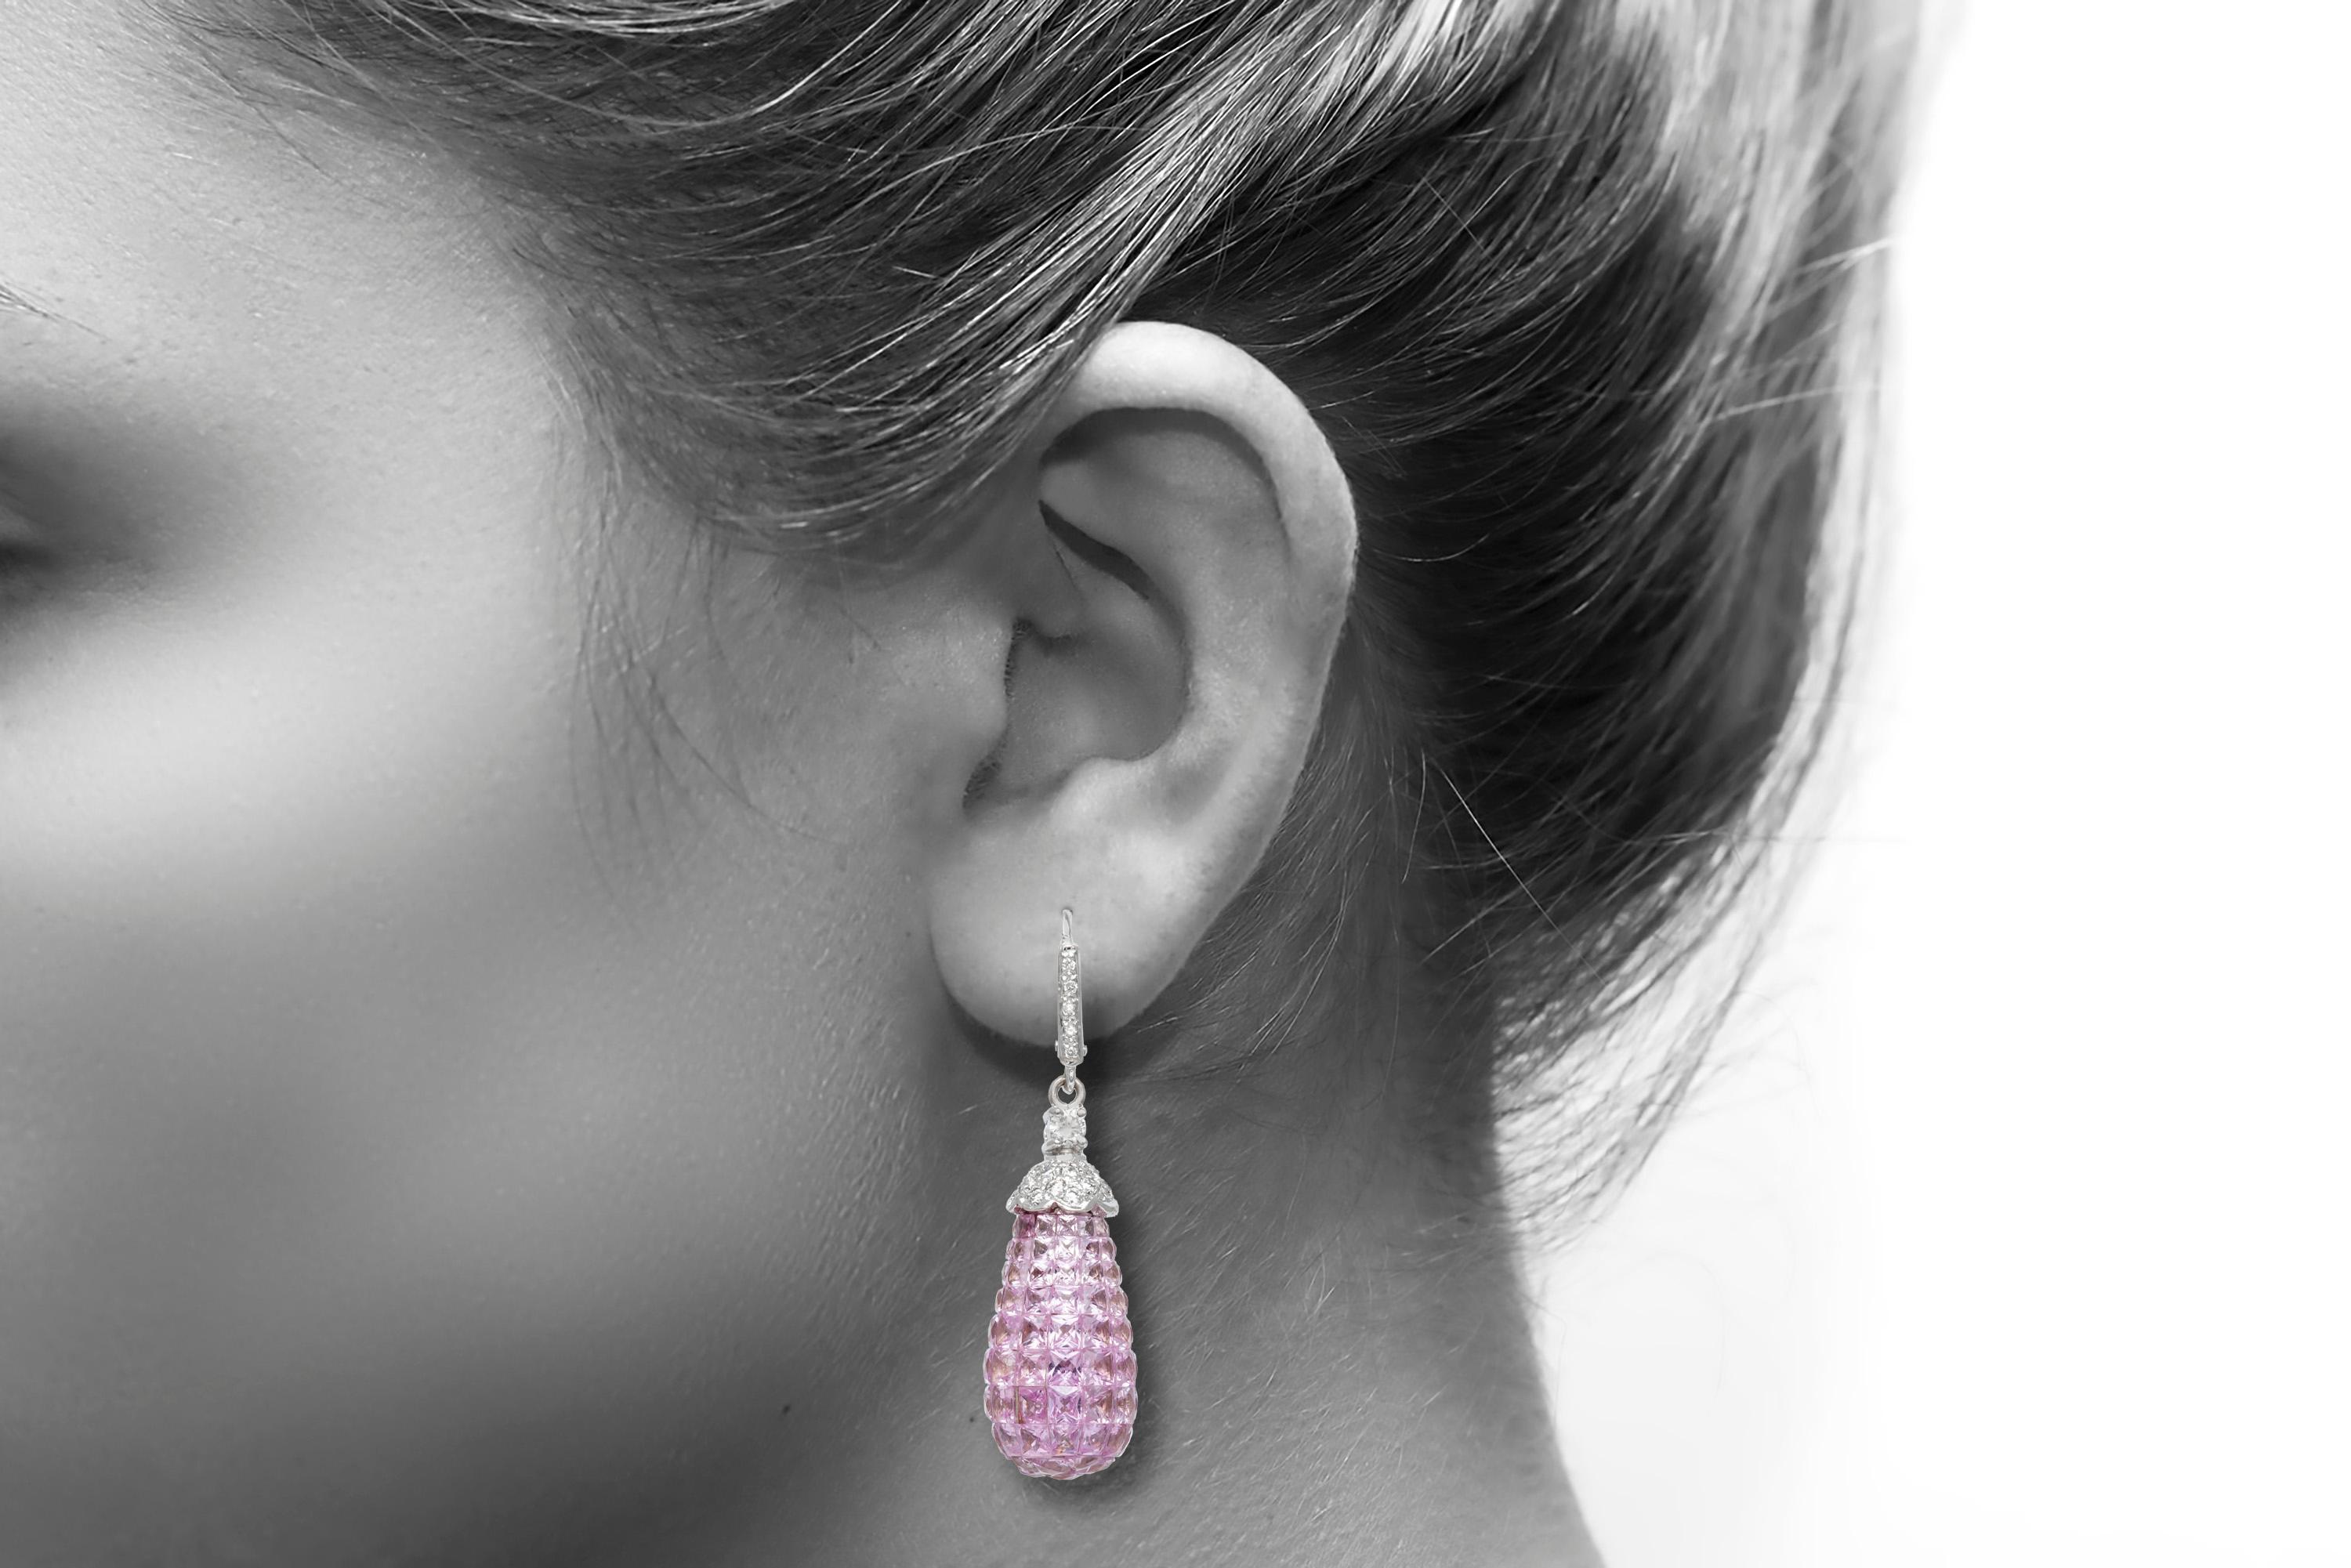 The earrings is finely crafted in 18k whute gold with diamonds weighing approximately total of 0.95 and pink sapphire weighing approximately total of 21.86.
